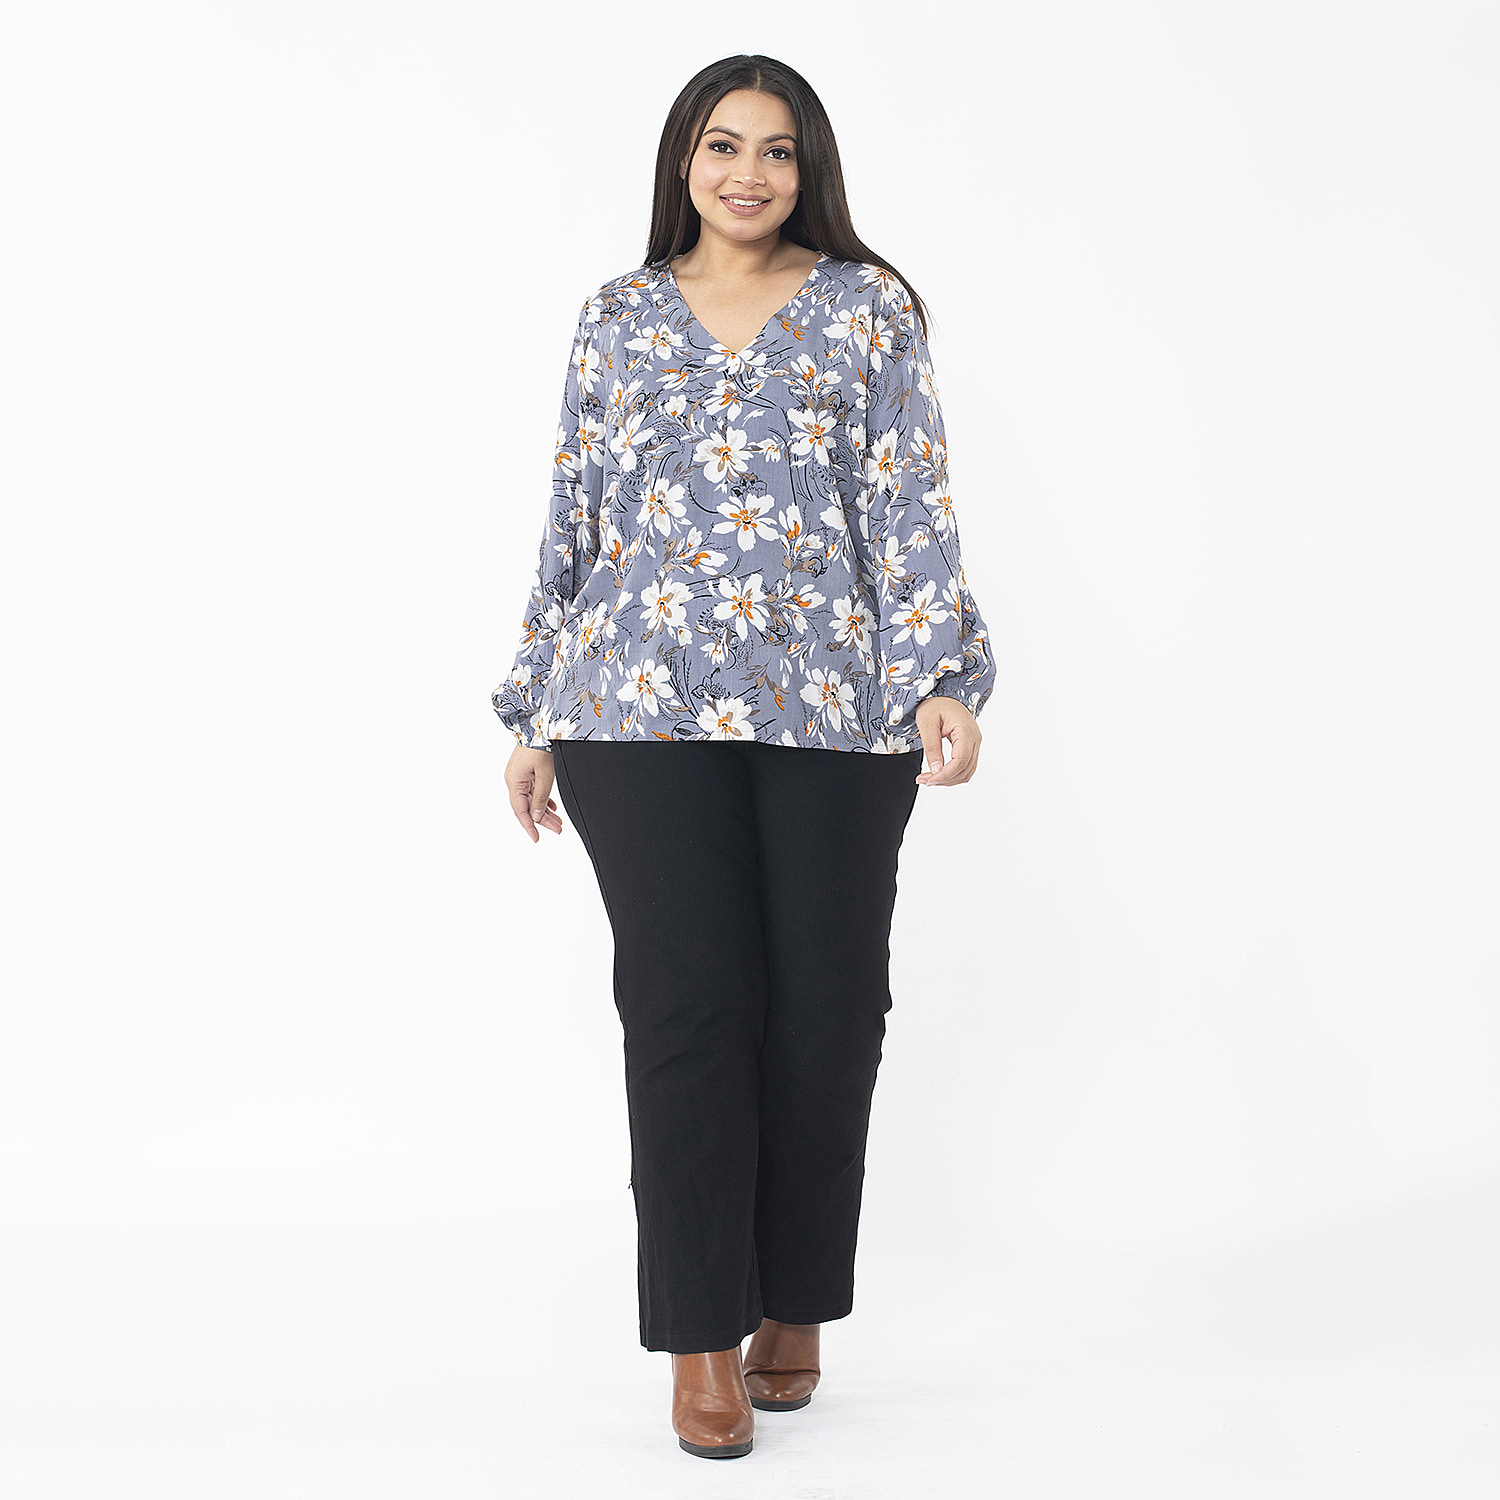 TAMSY 100% Viscose Floral Printed V Neck Full Sleeve Top with Elastic at Cuffs (Size S, 8-10) - Grey